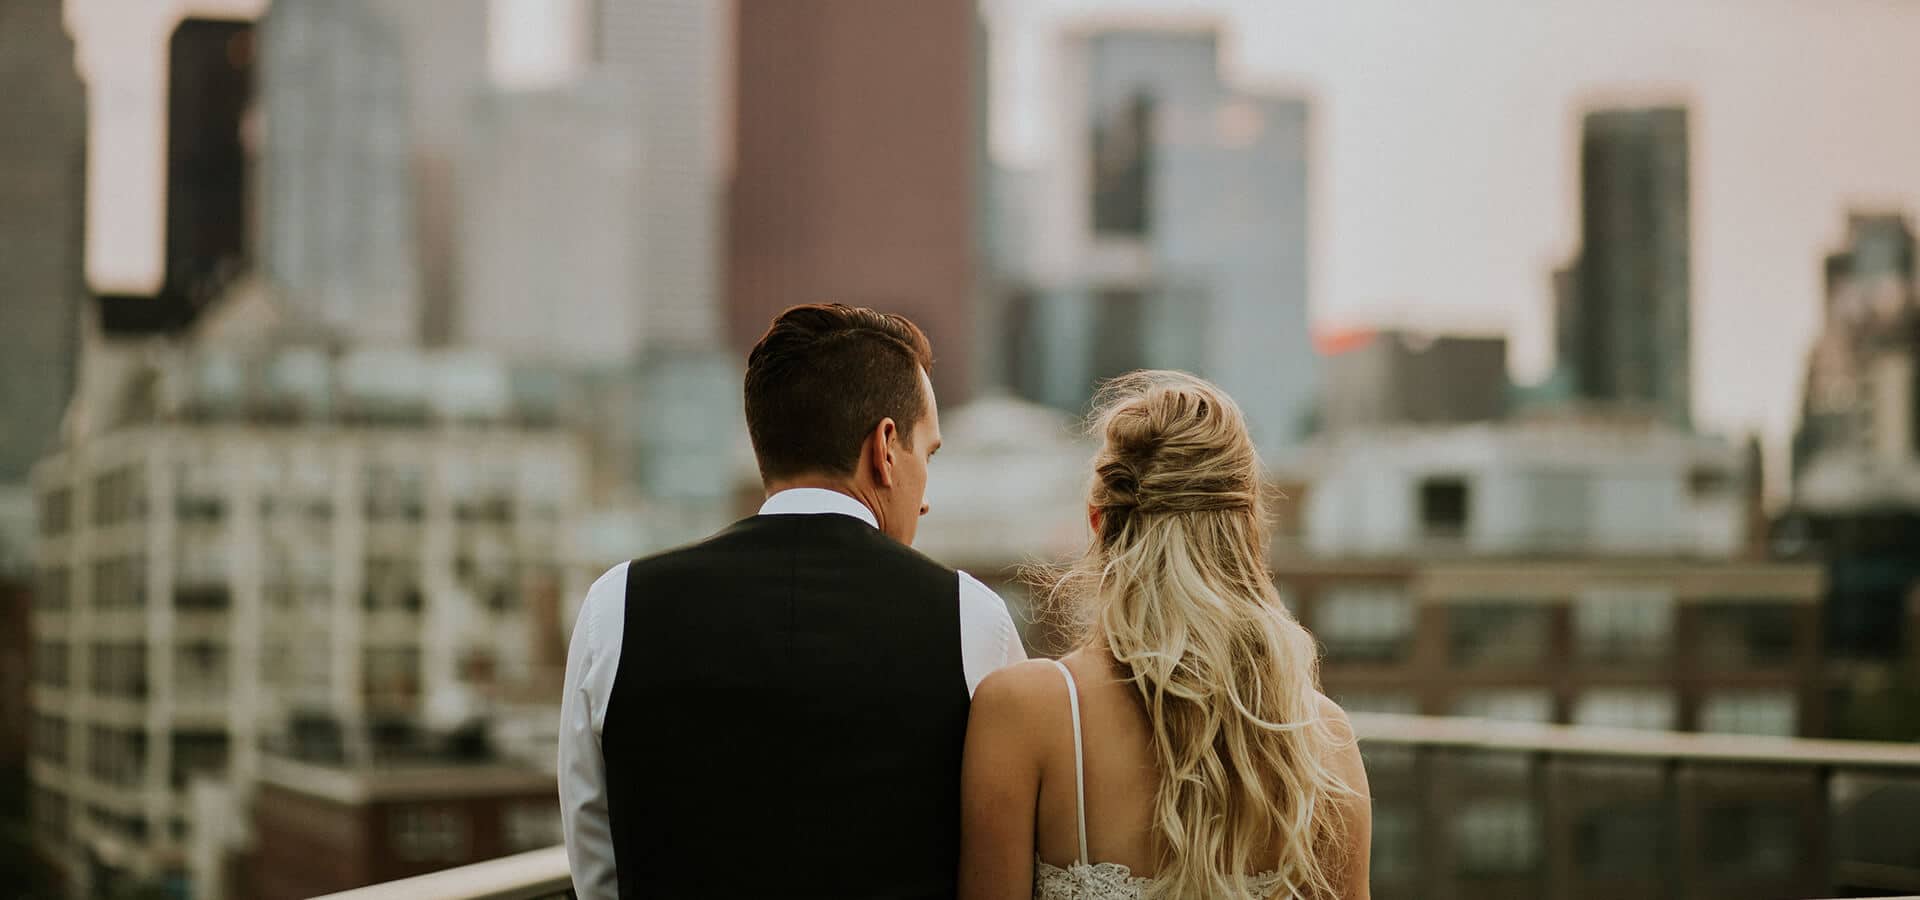 Hero image for Krystal and Cody’s Storybook Wedding at Archeo